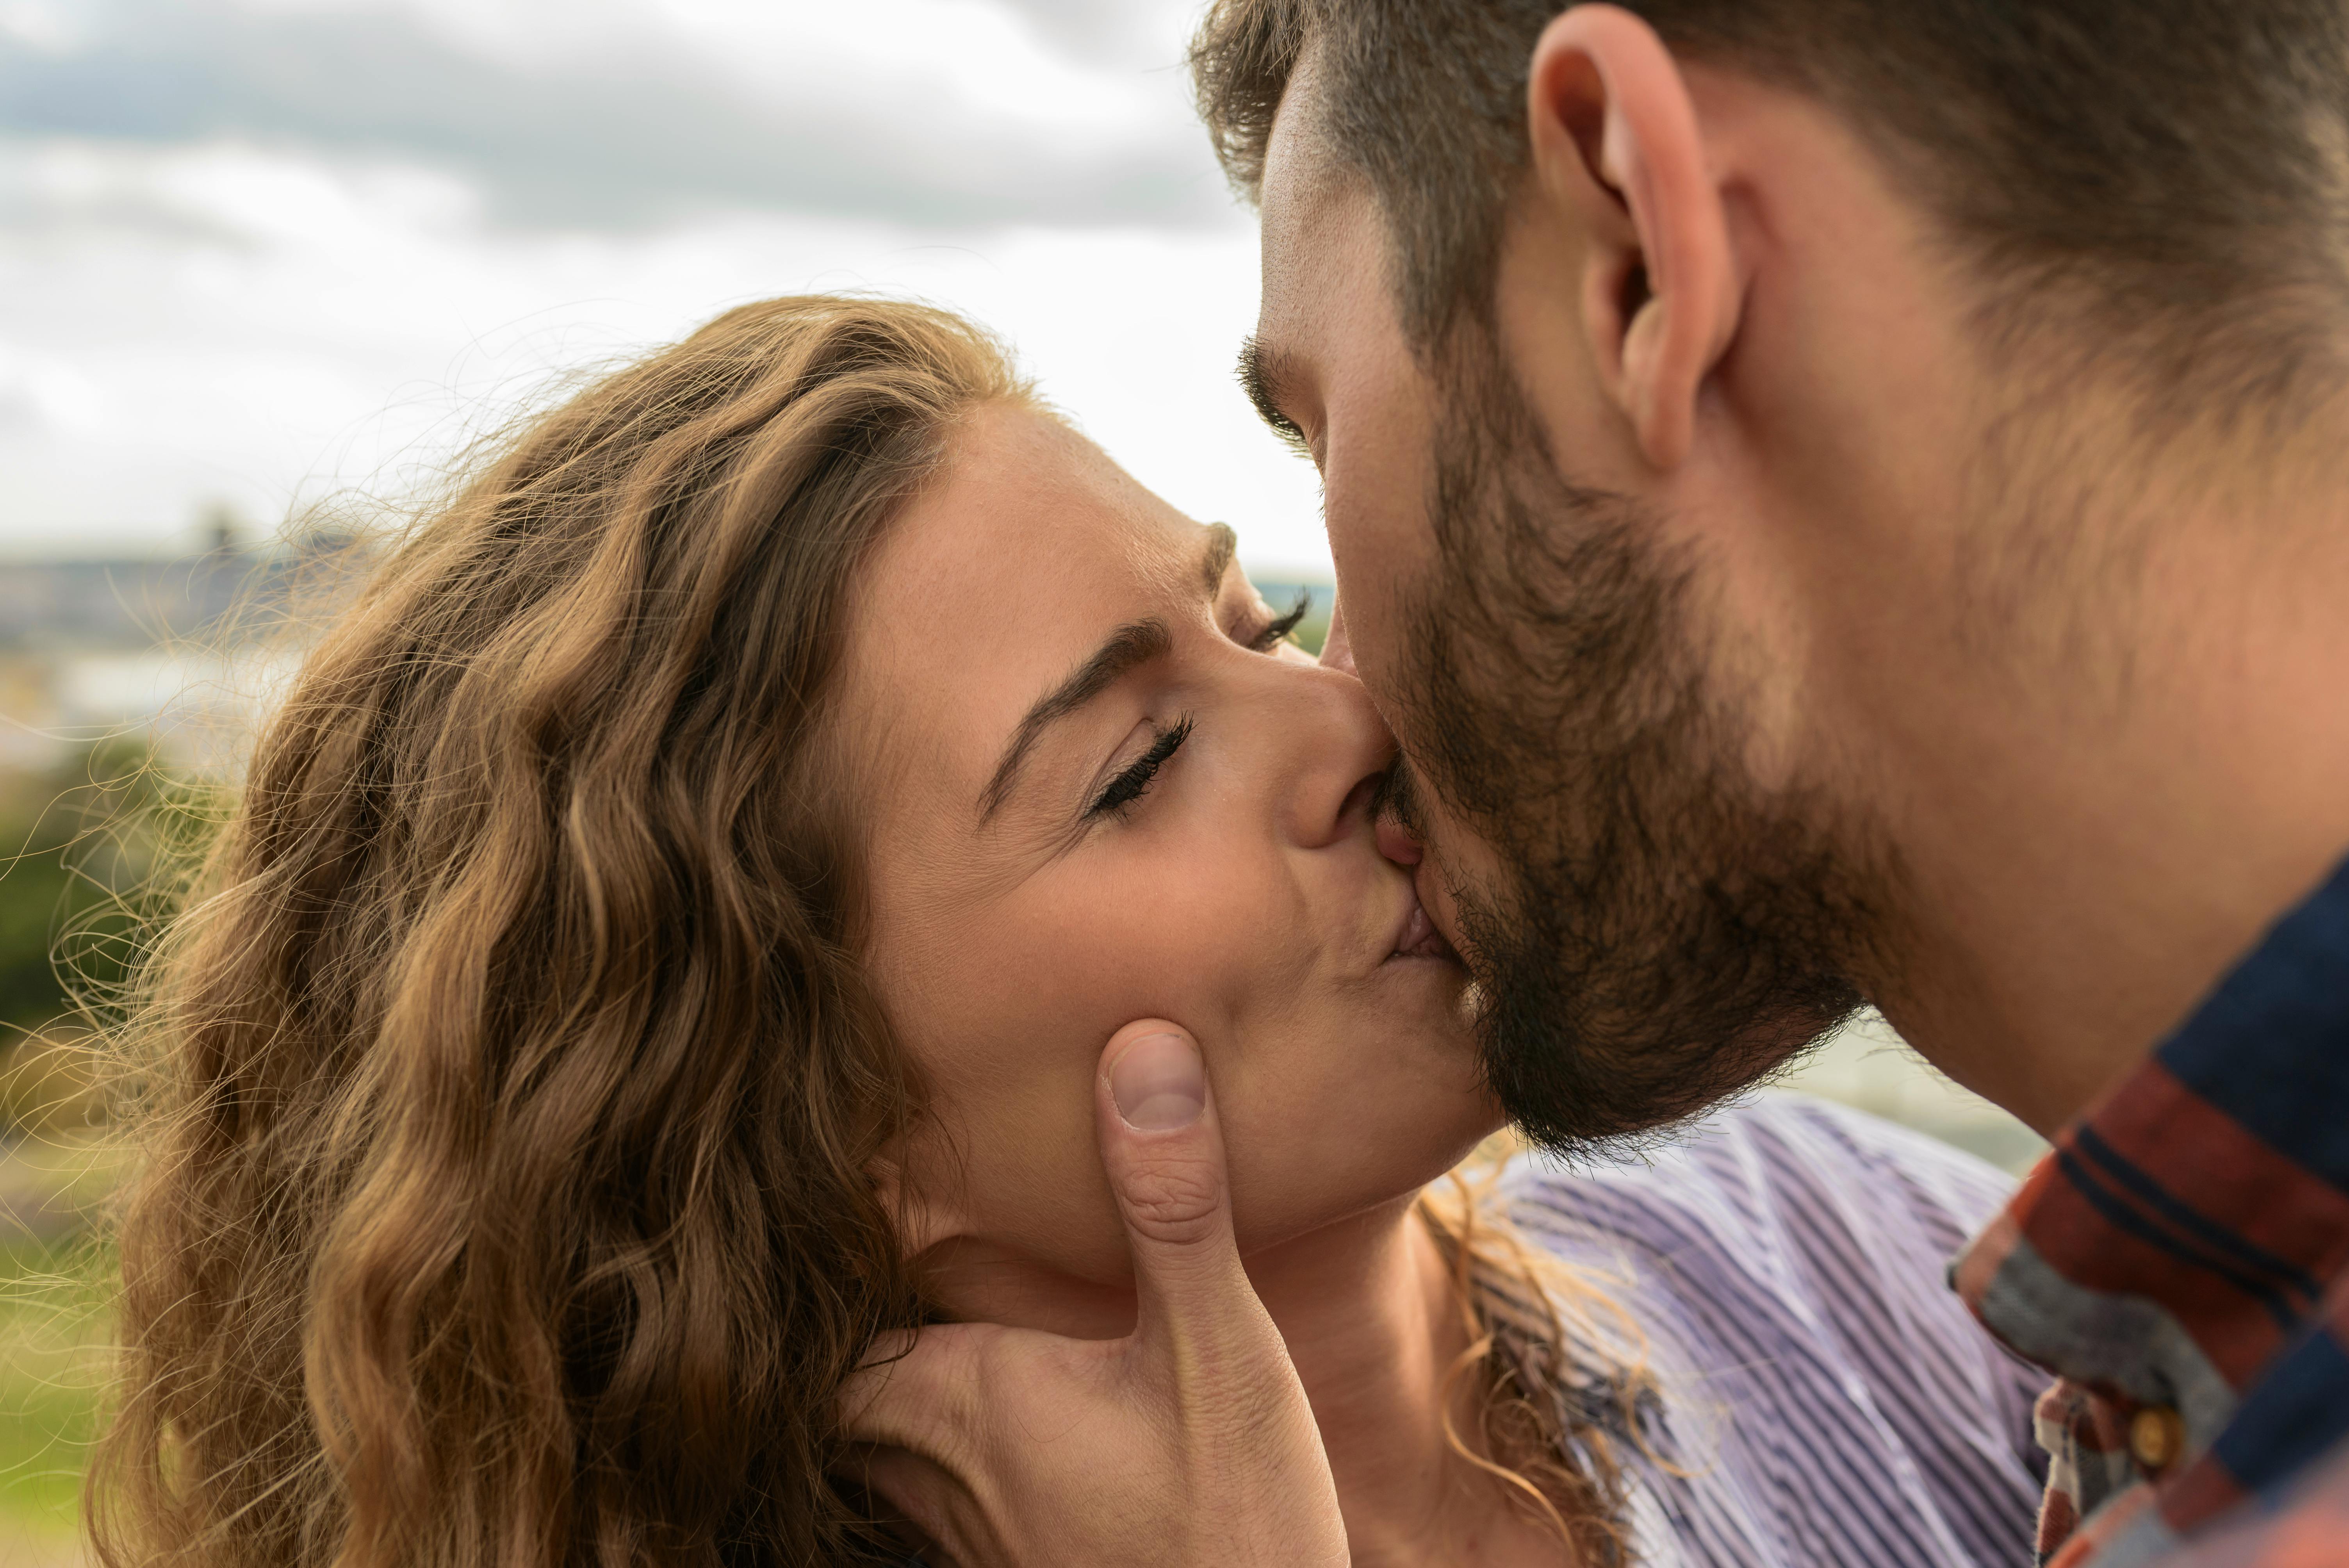 How to Kiss Someone 9 Tips to Make Kissing Even Better  SELF